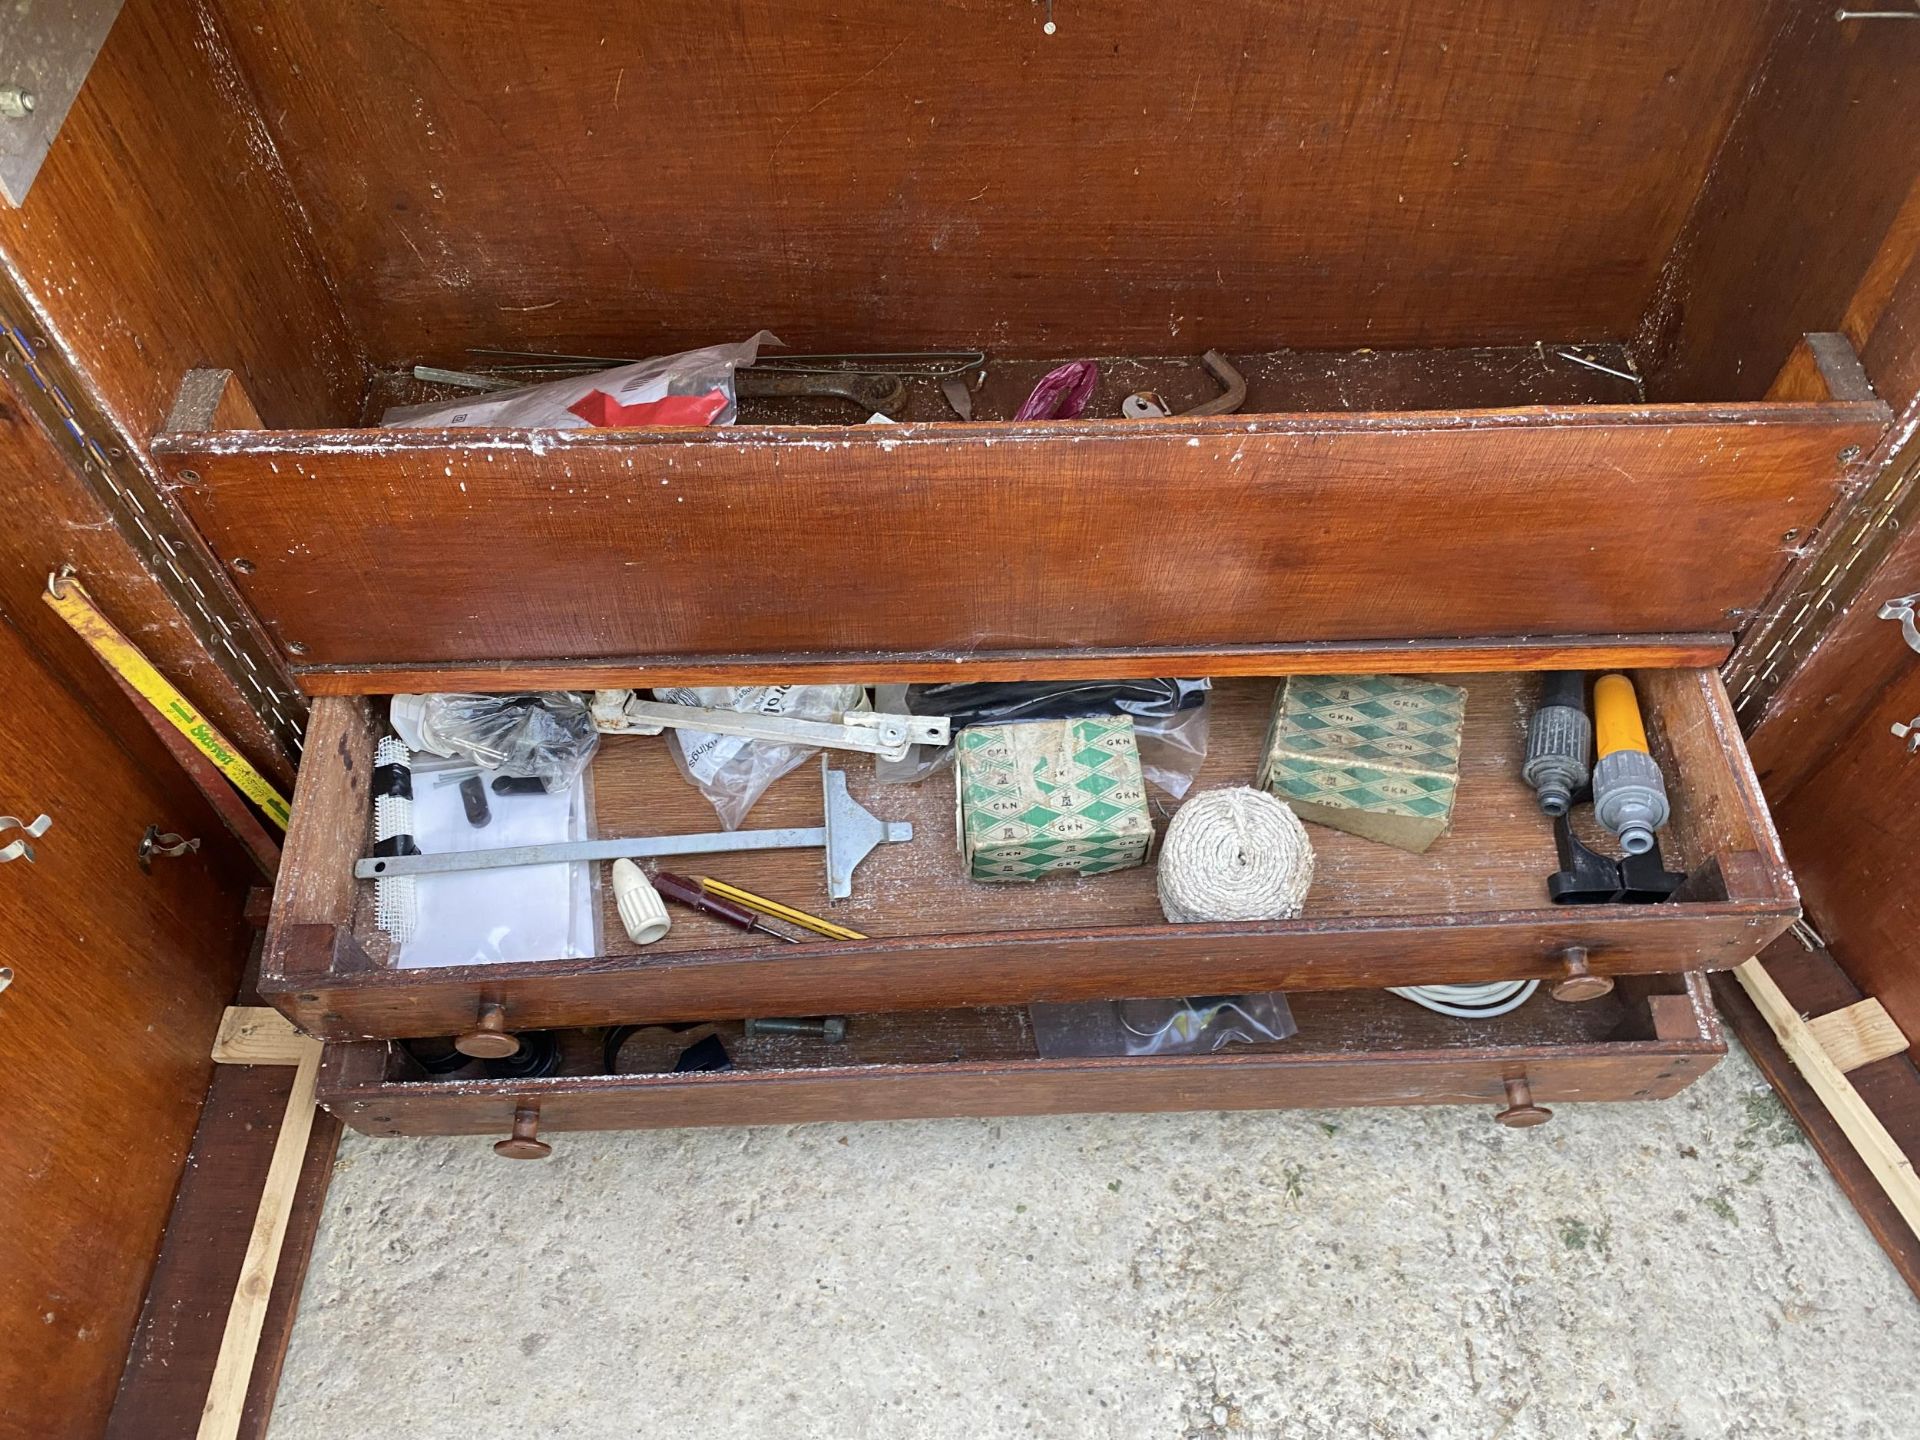 A LARGE VINTAGE WOODEN JOINERS CHEST WITH AN ASSORTMENT OF TOOLS - Image 2 of 3